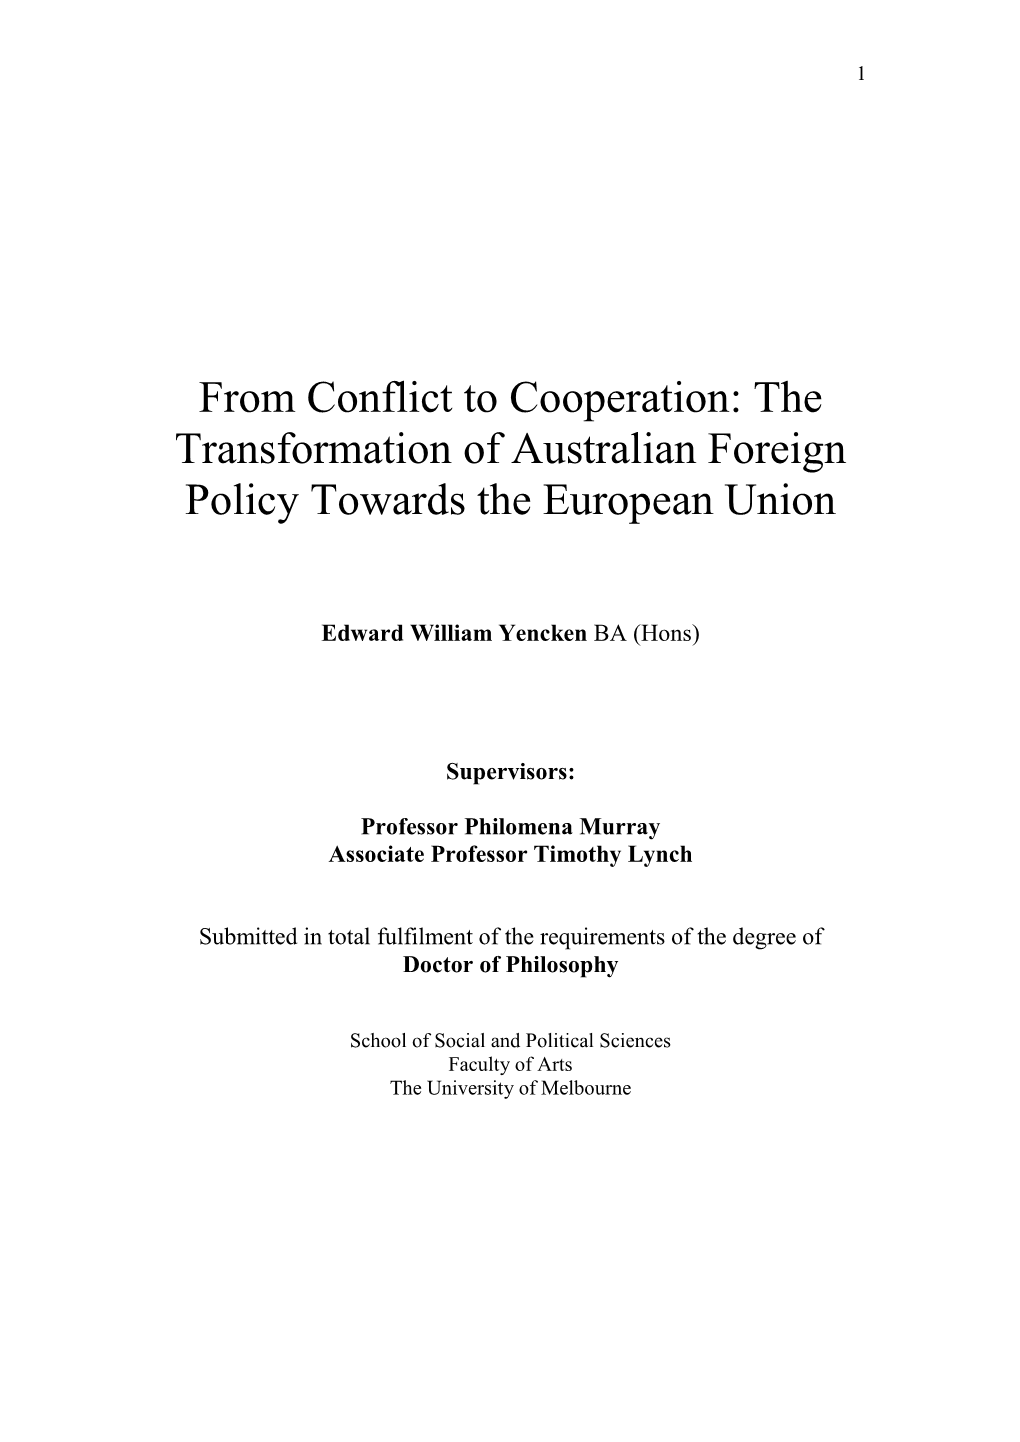 The Transformation of Australian Foreign Policy Towards the European Union